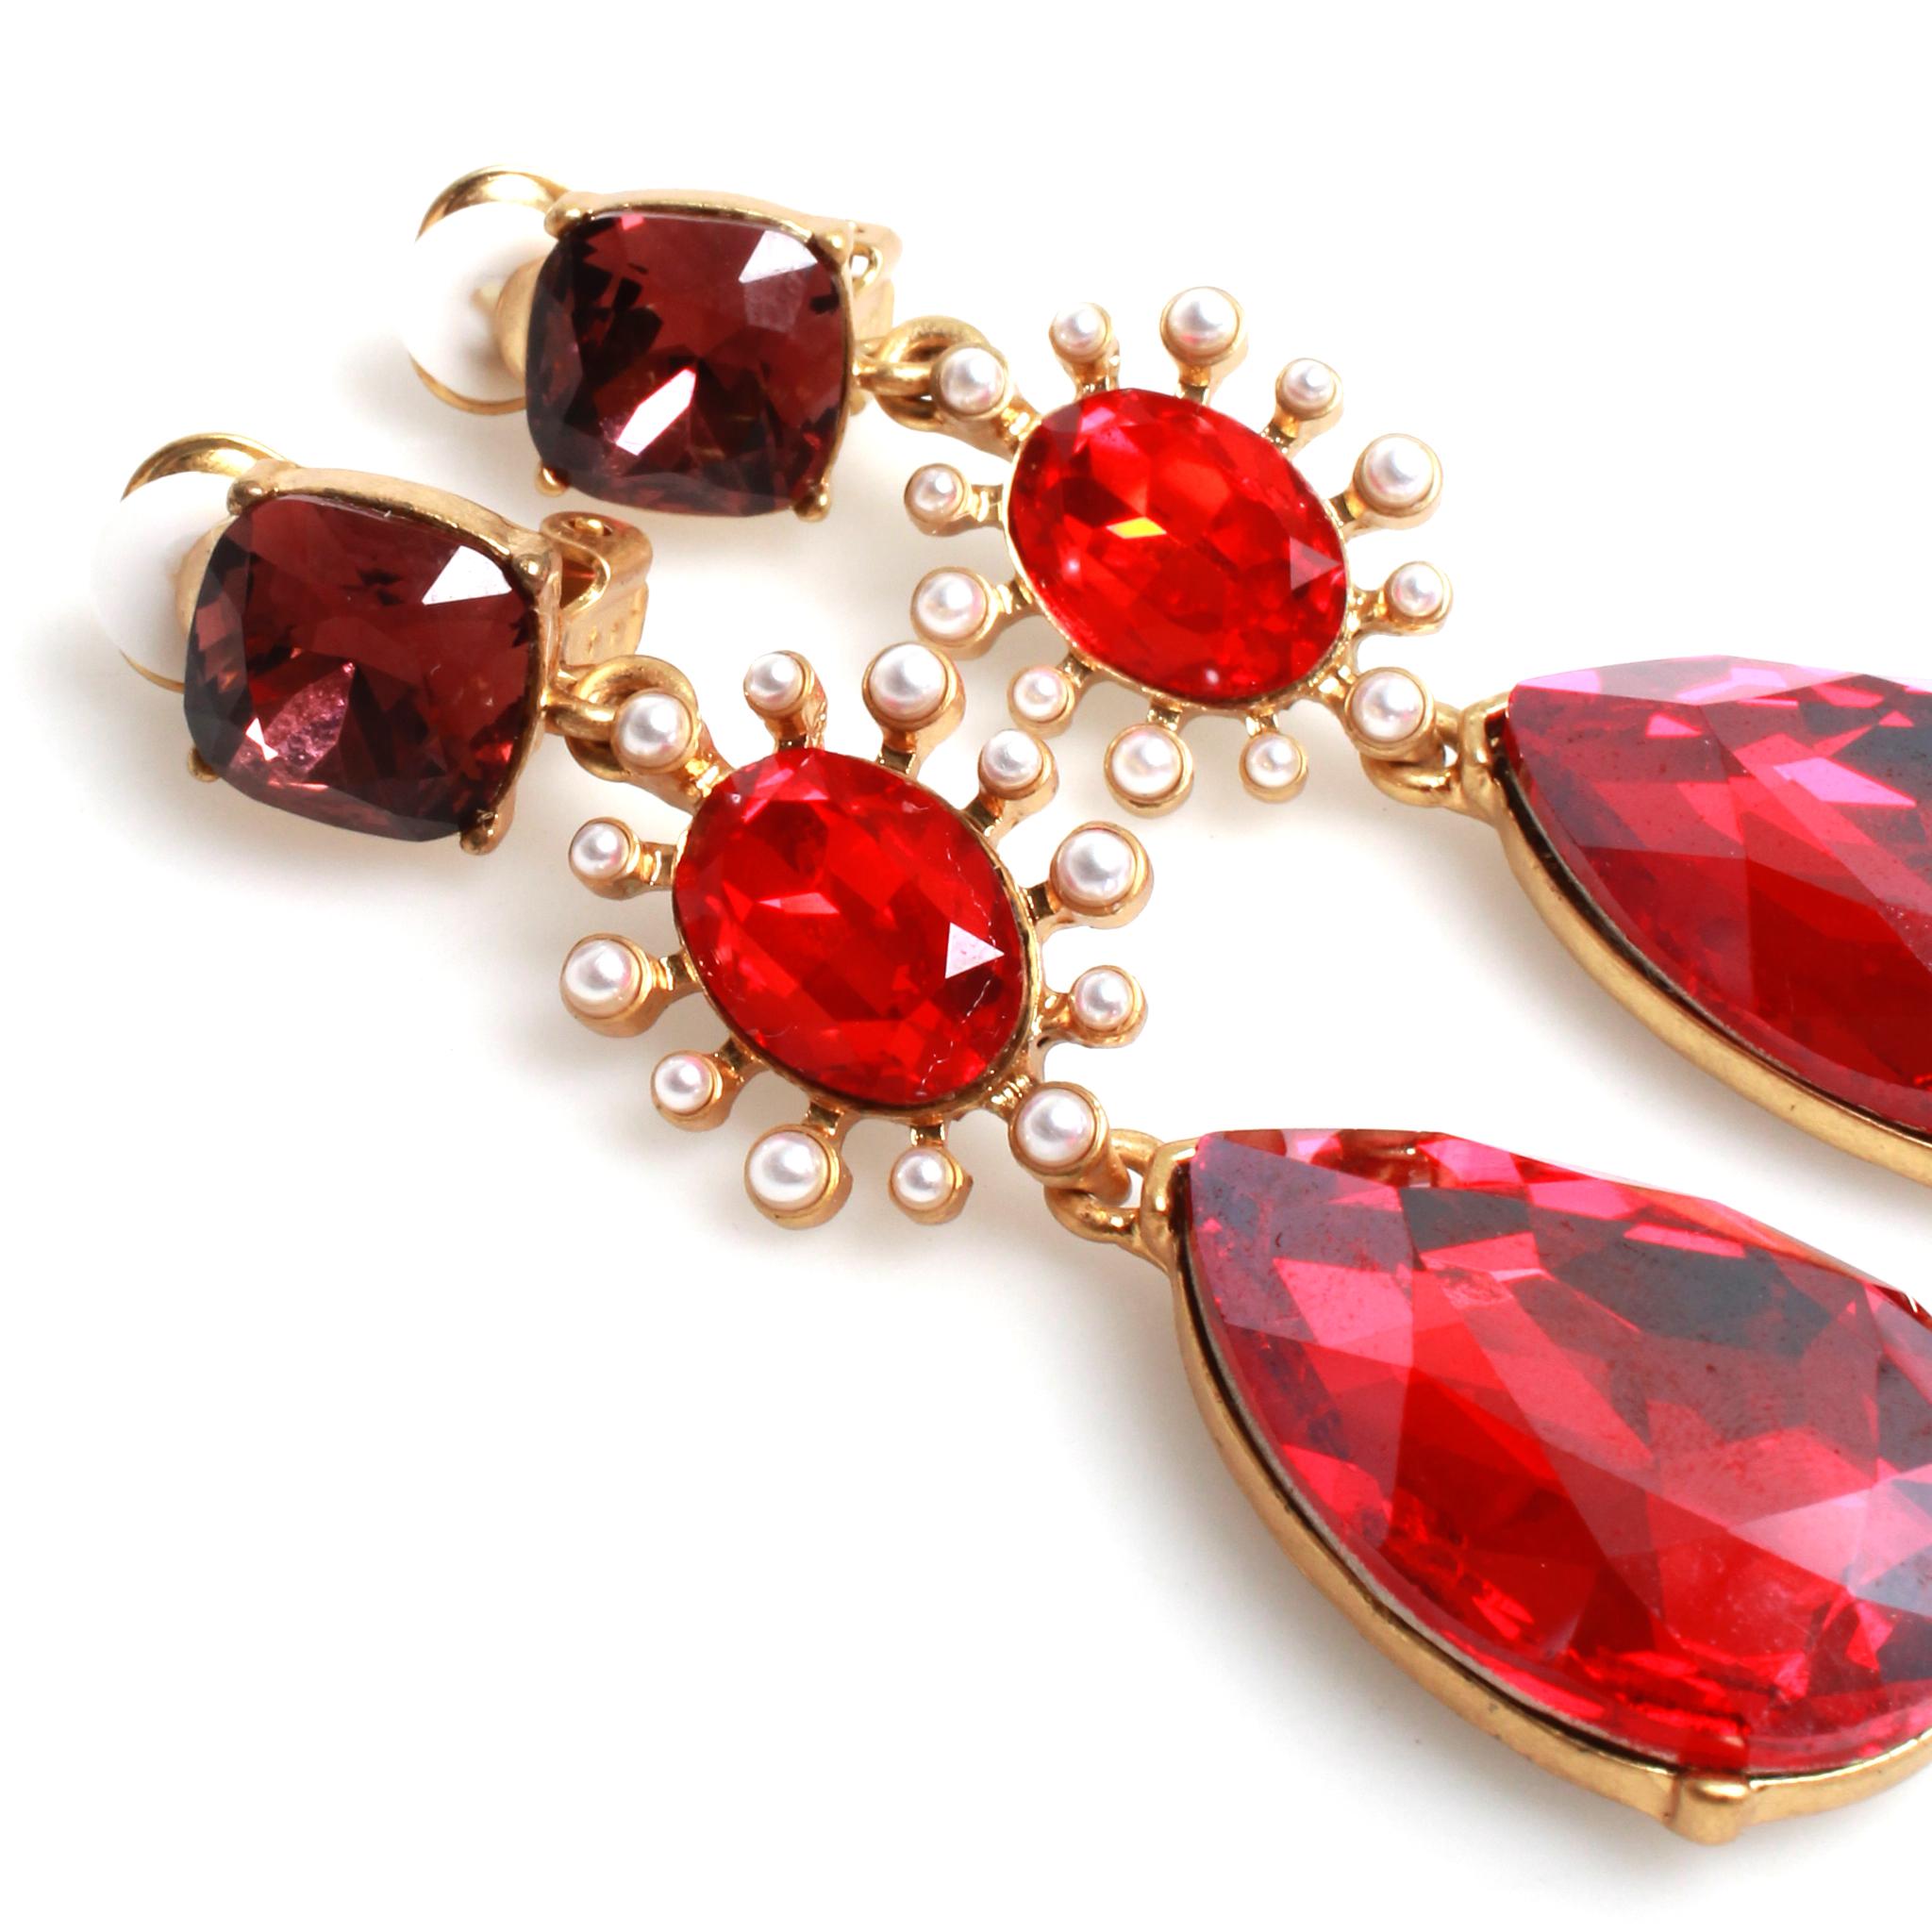 Gold-tone metal Oscar de la Renta ruby colored drop earrings featuring crystals and faux pearl detailing with clip-on closures with rubber comfort pads.
